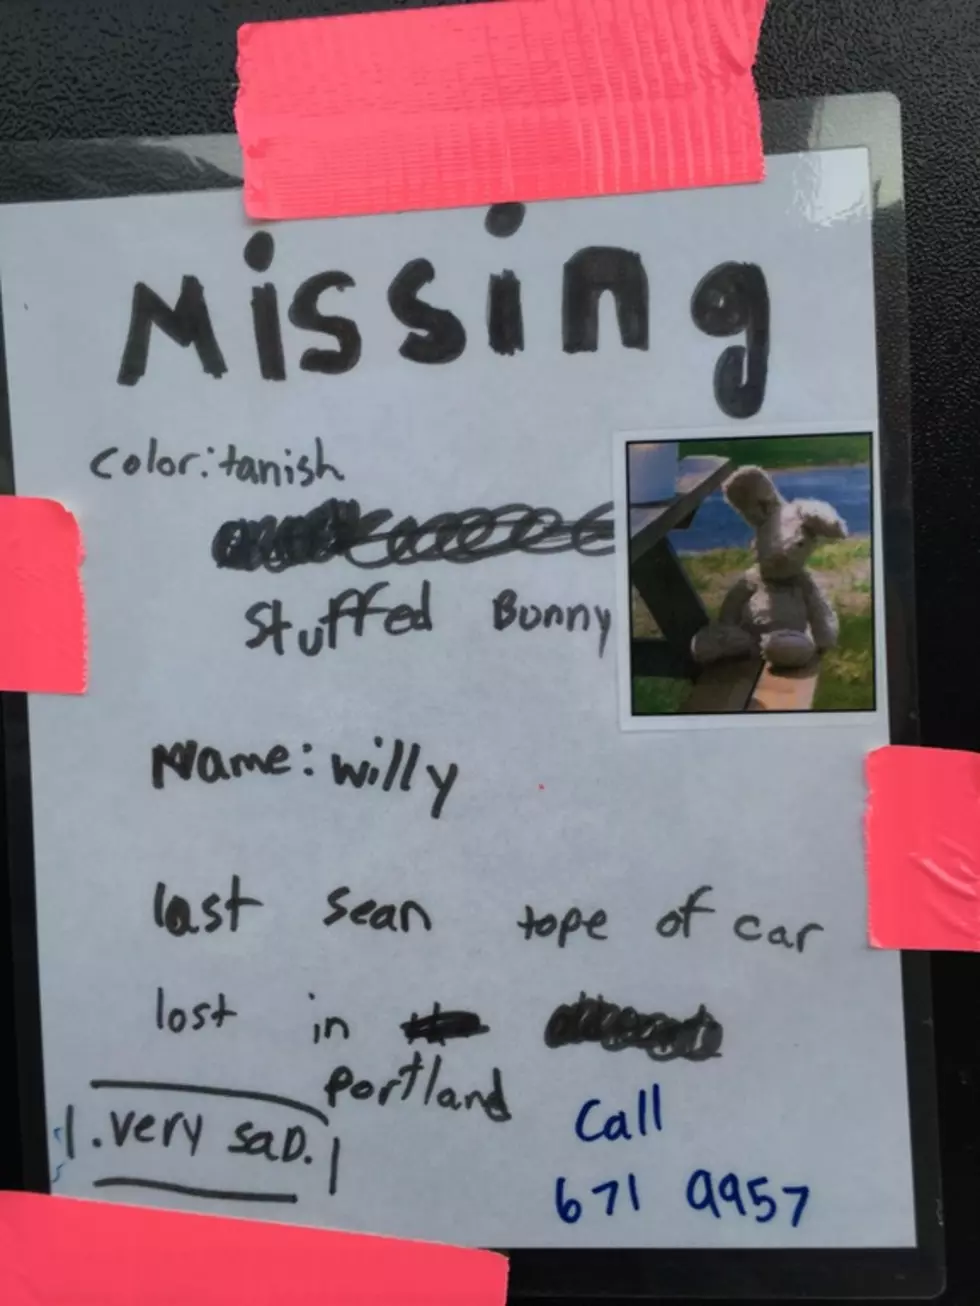 Portland Child Makes Heartbreaking Poster Asking For Help Finding A Stuffed Bunny